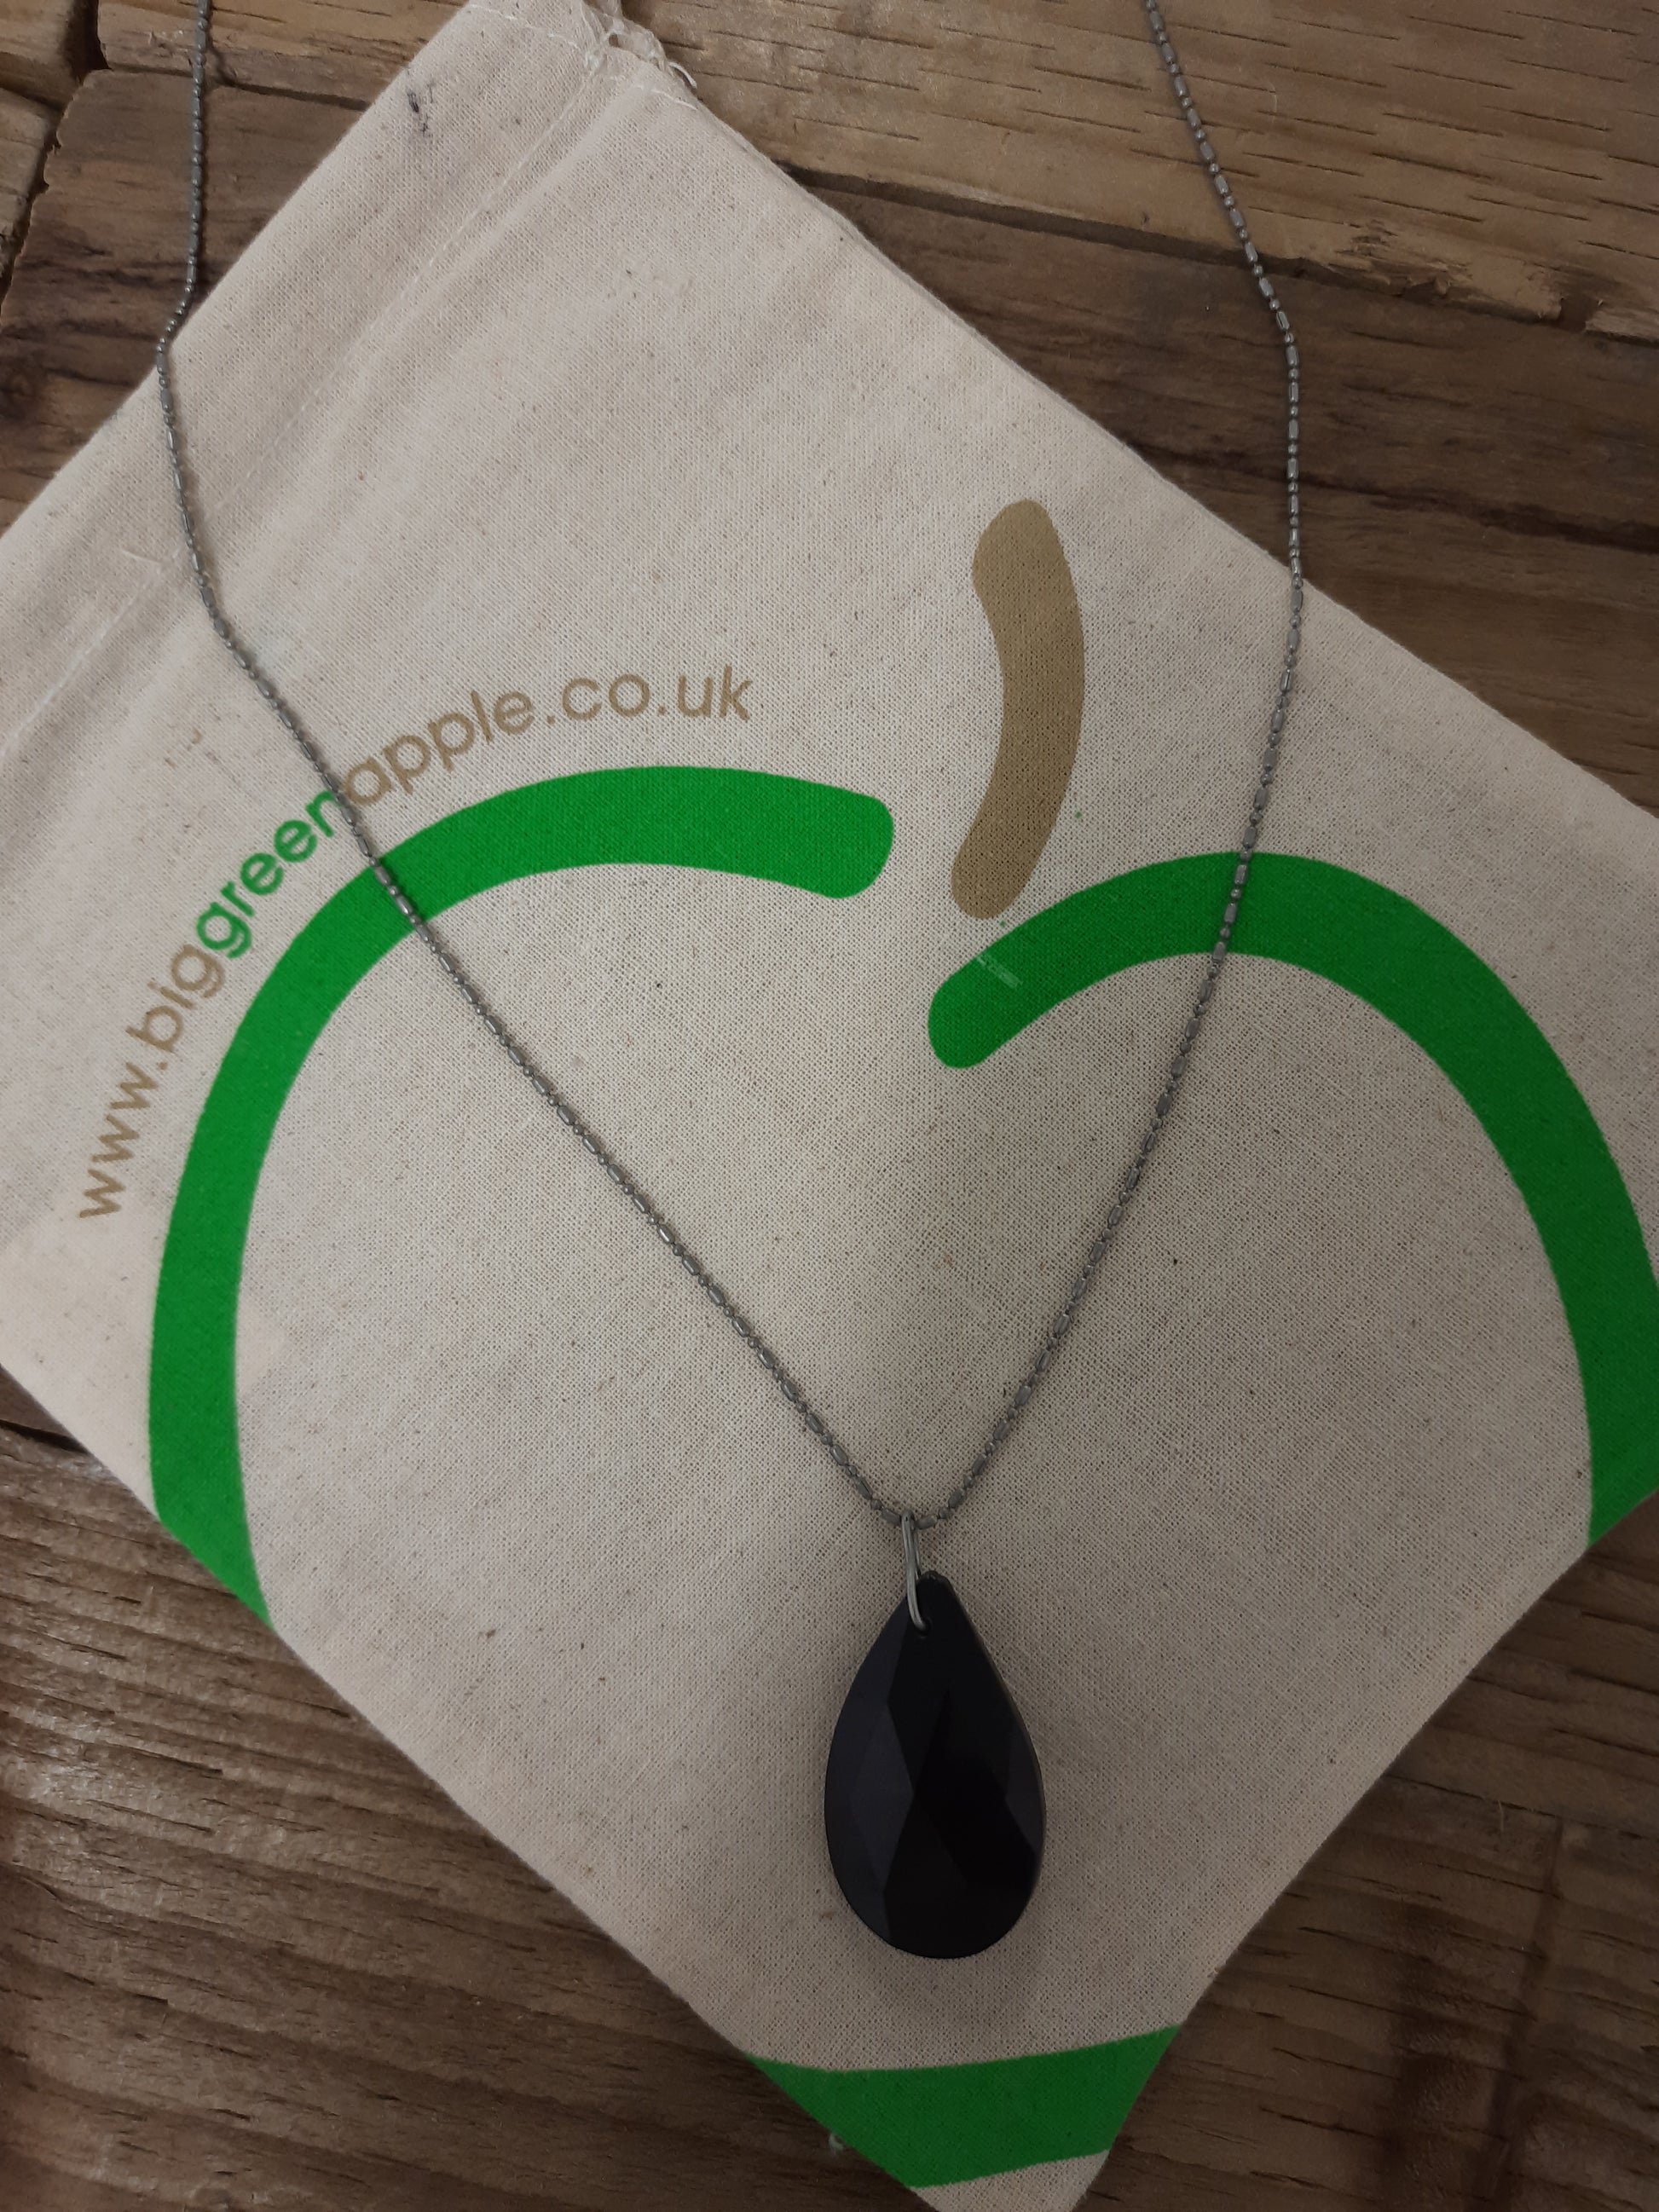 Eco Friendly Online Stores, Christmas Gifts, Ethically Sourced Gifts, Fair Trade Gifts, Jewellery, BIG GREEN APPLE 